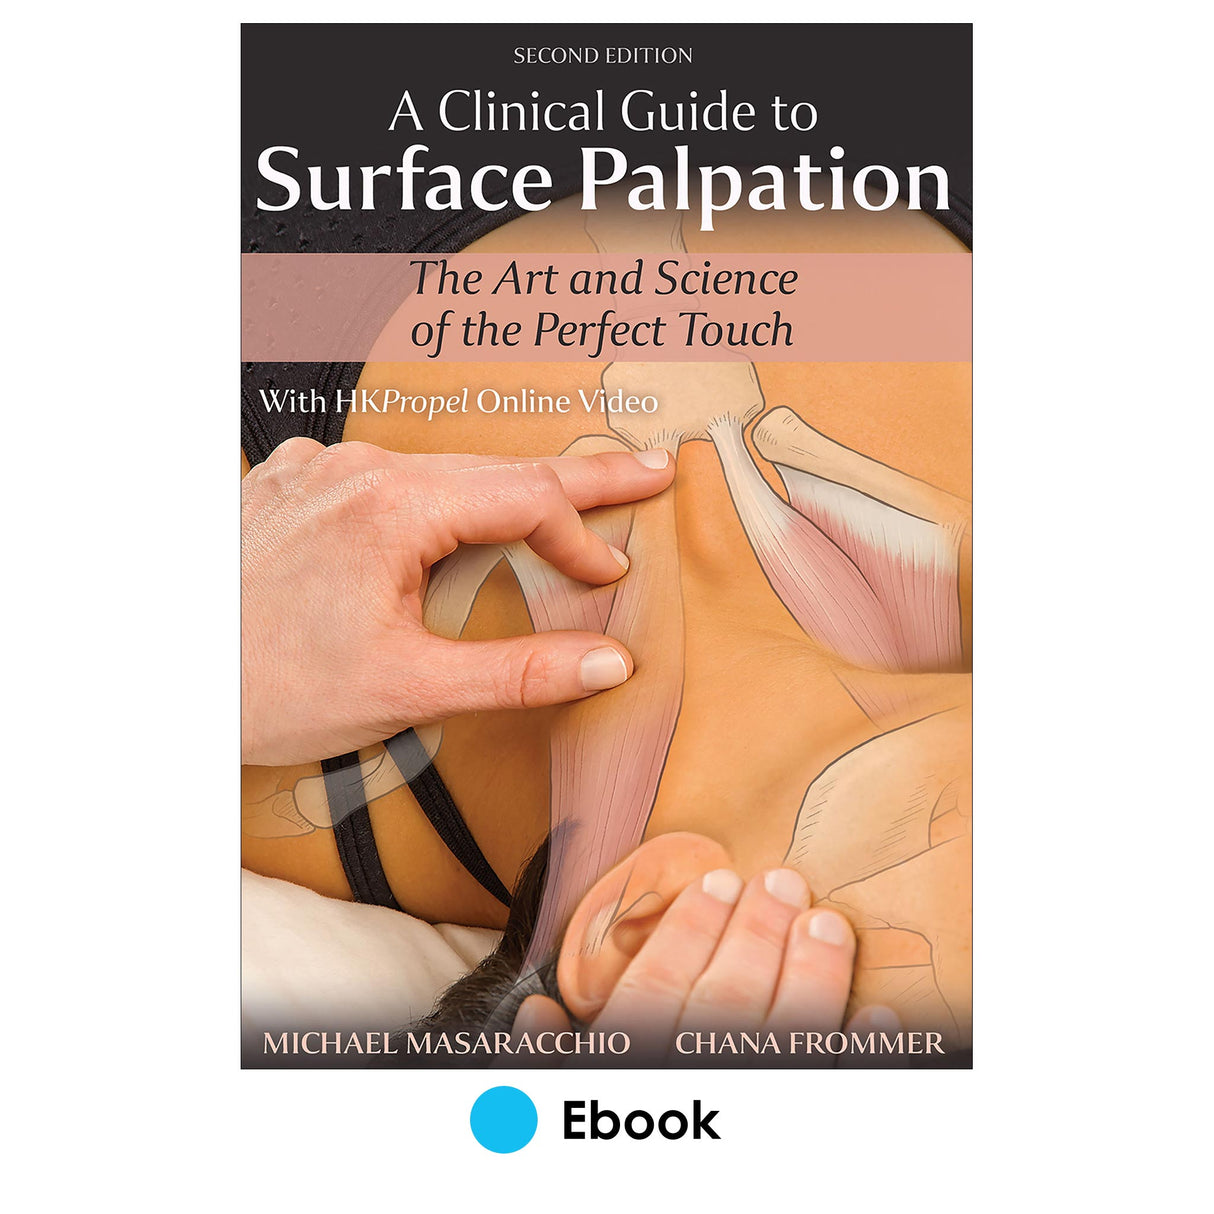 Clinical Guide to Surface Palpation 2nd Edition Ebook With HKPropel Online Video, A